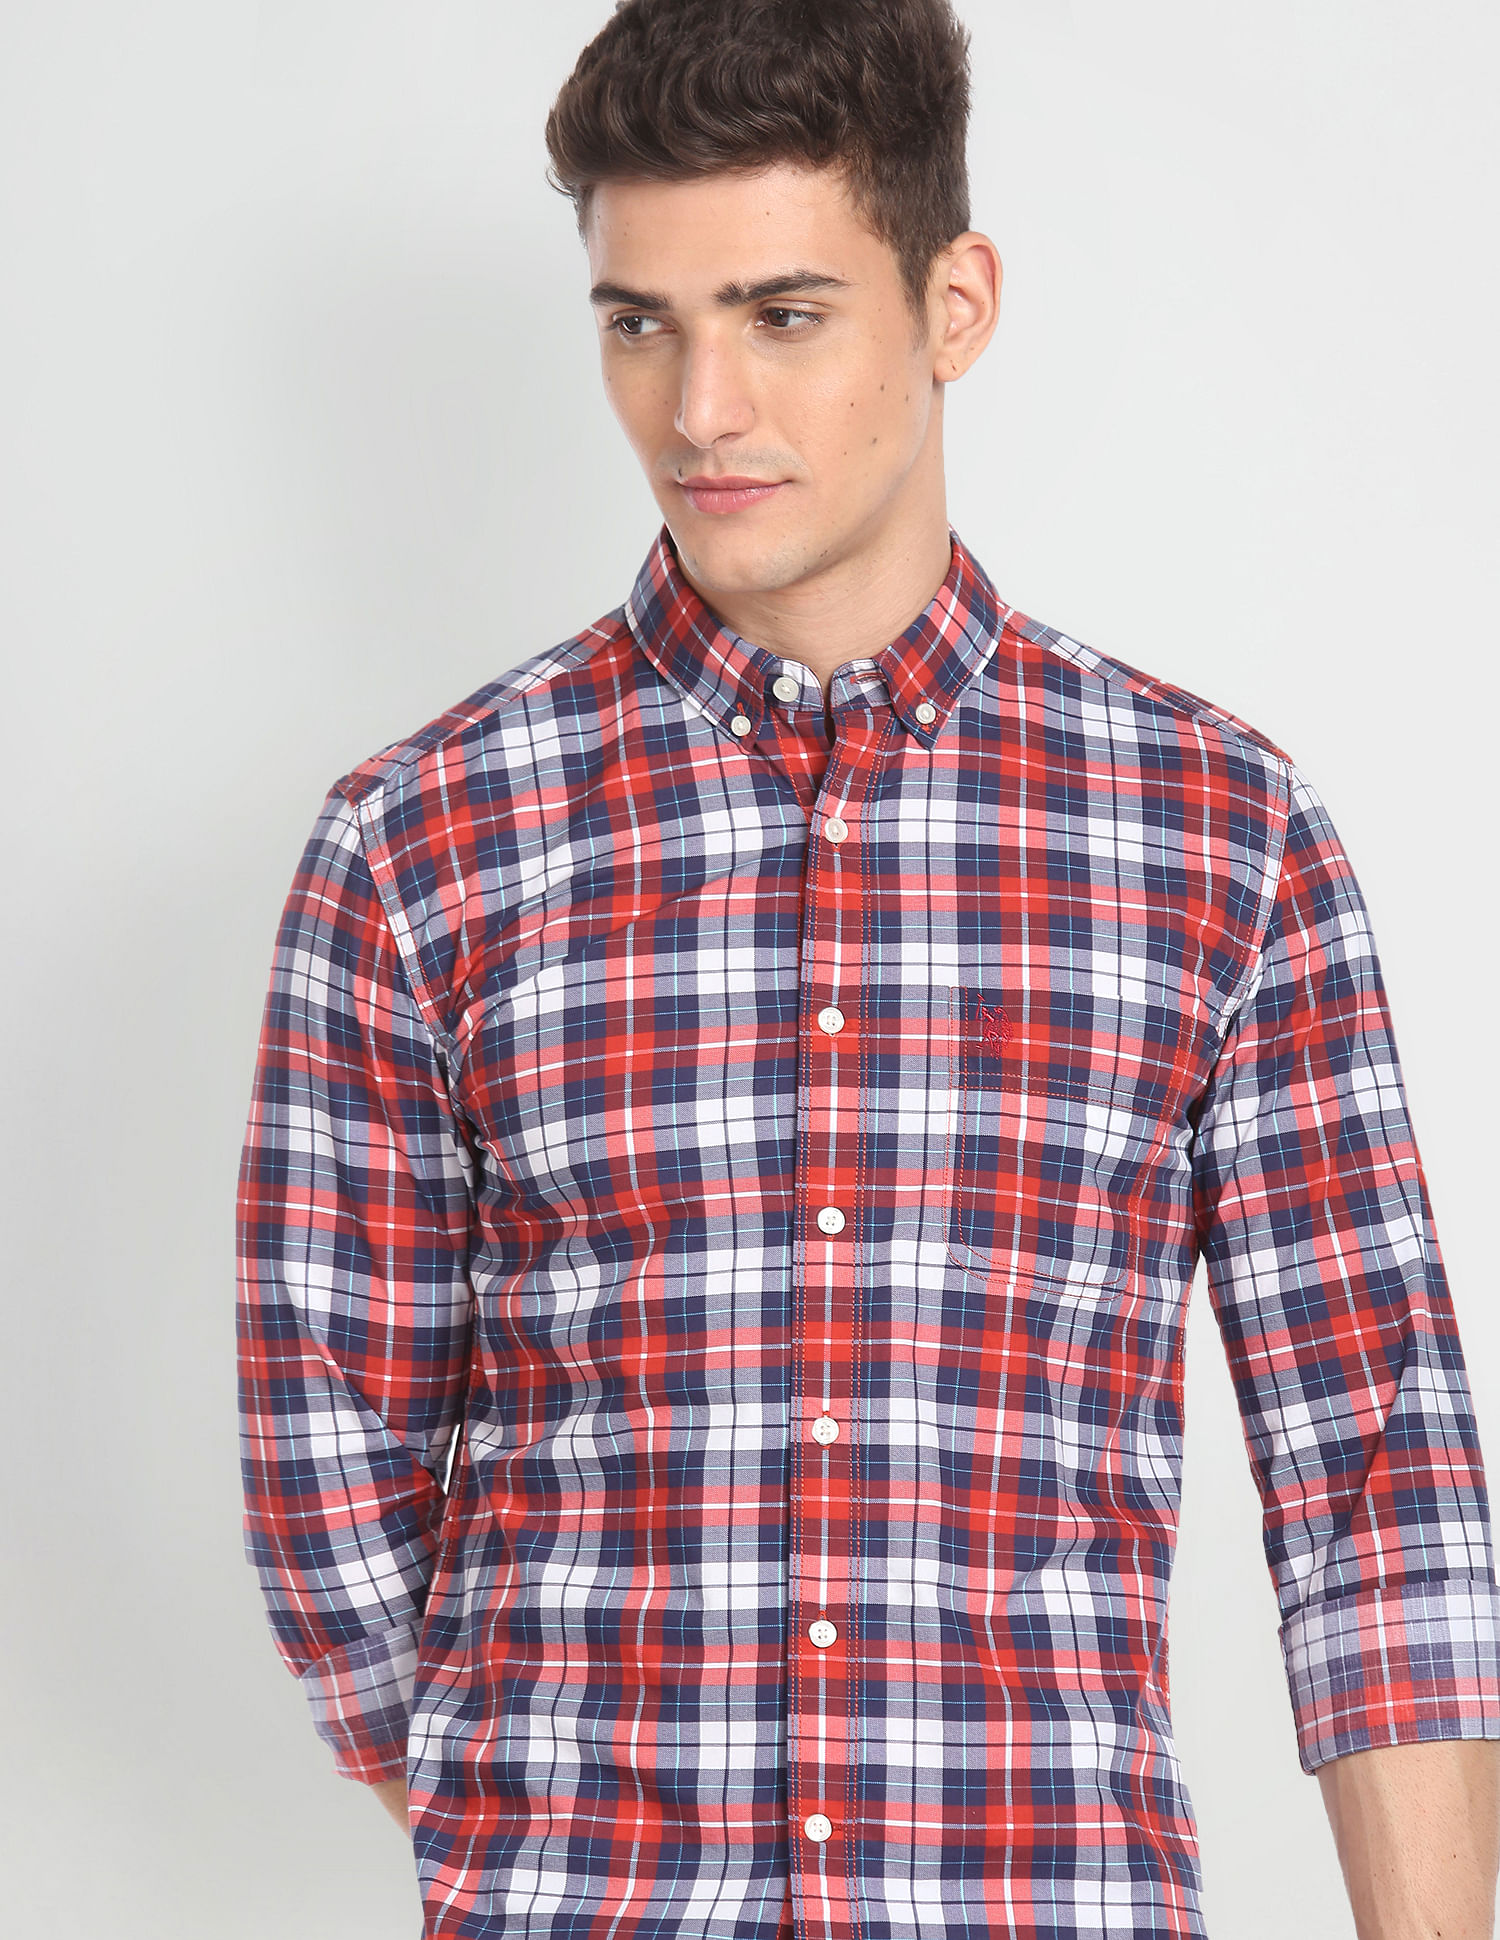 Combo Jeans Shirts - Buy Combo Jeans Shirts online in India